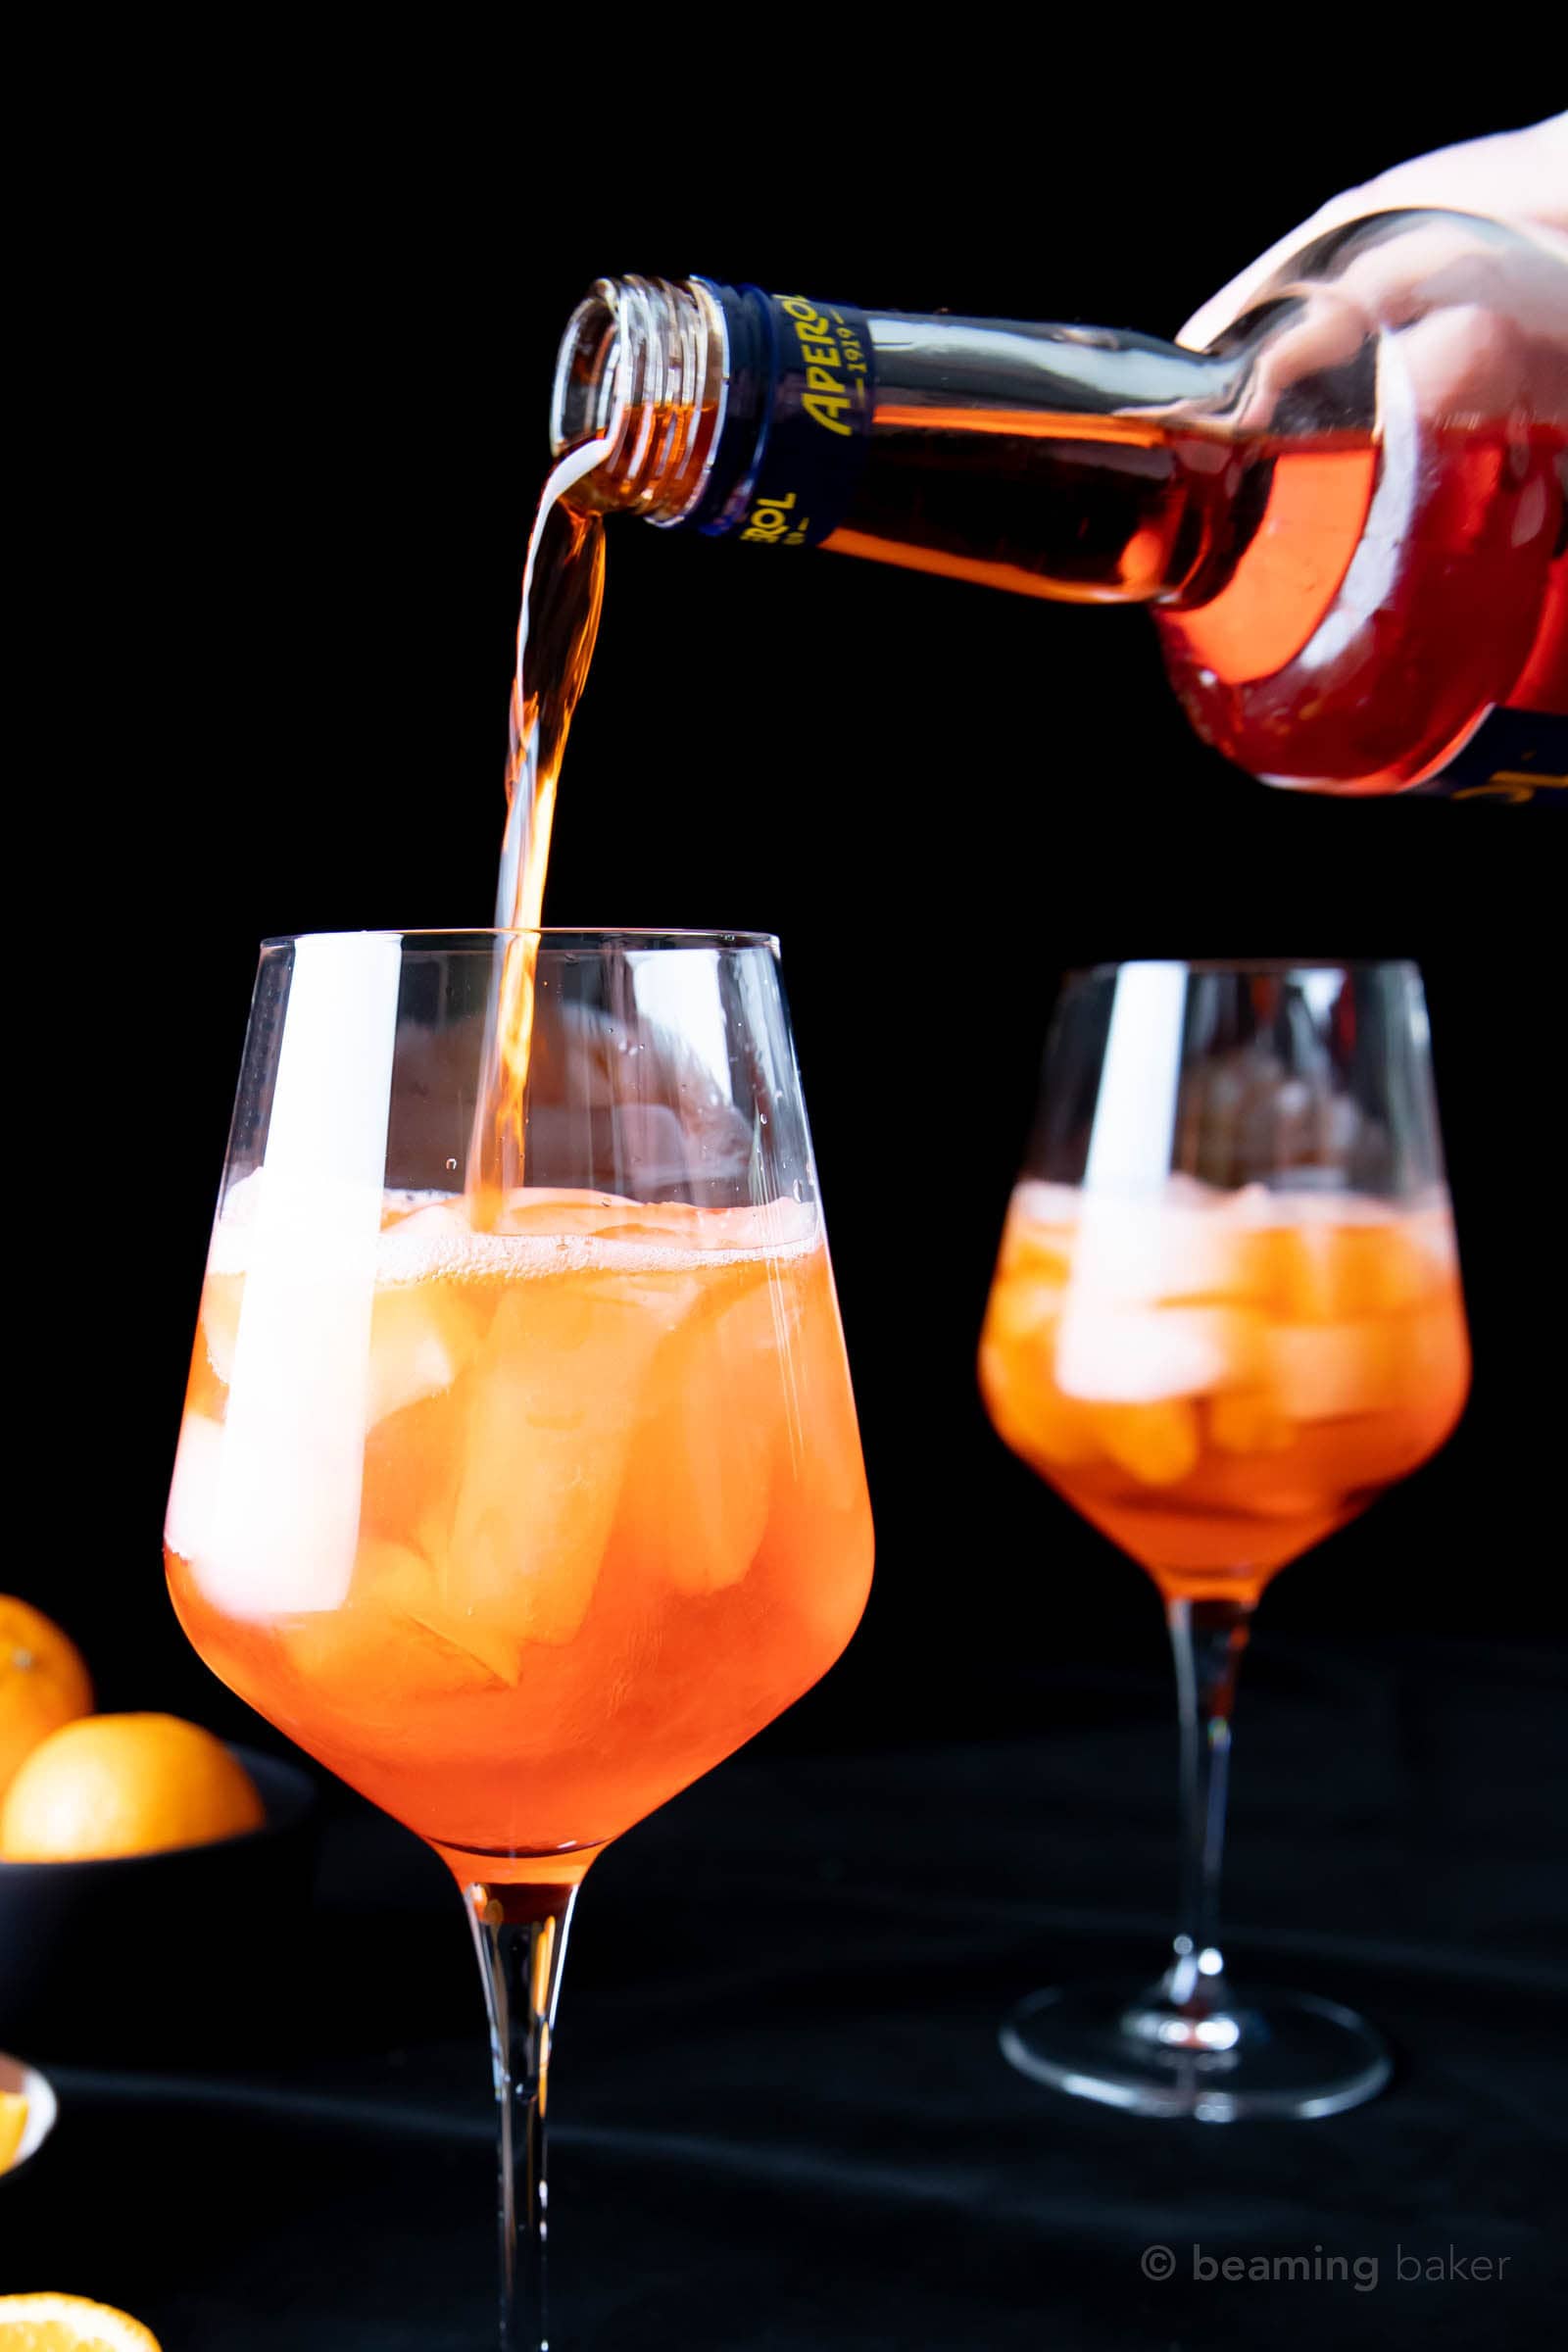 Pouring more Aperol into glass, filling it more than halfway for Aperol Spritz